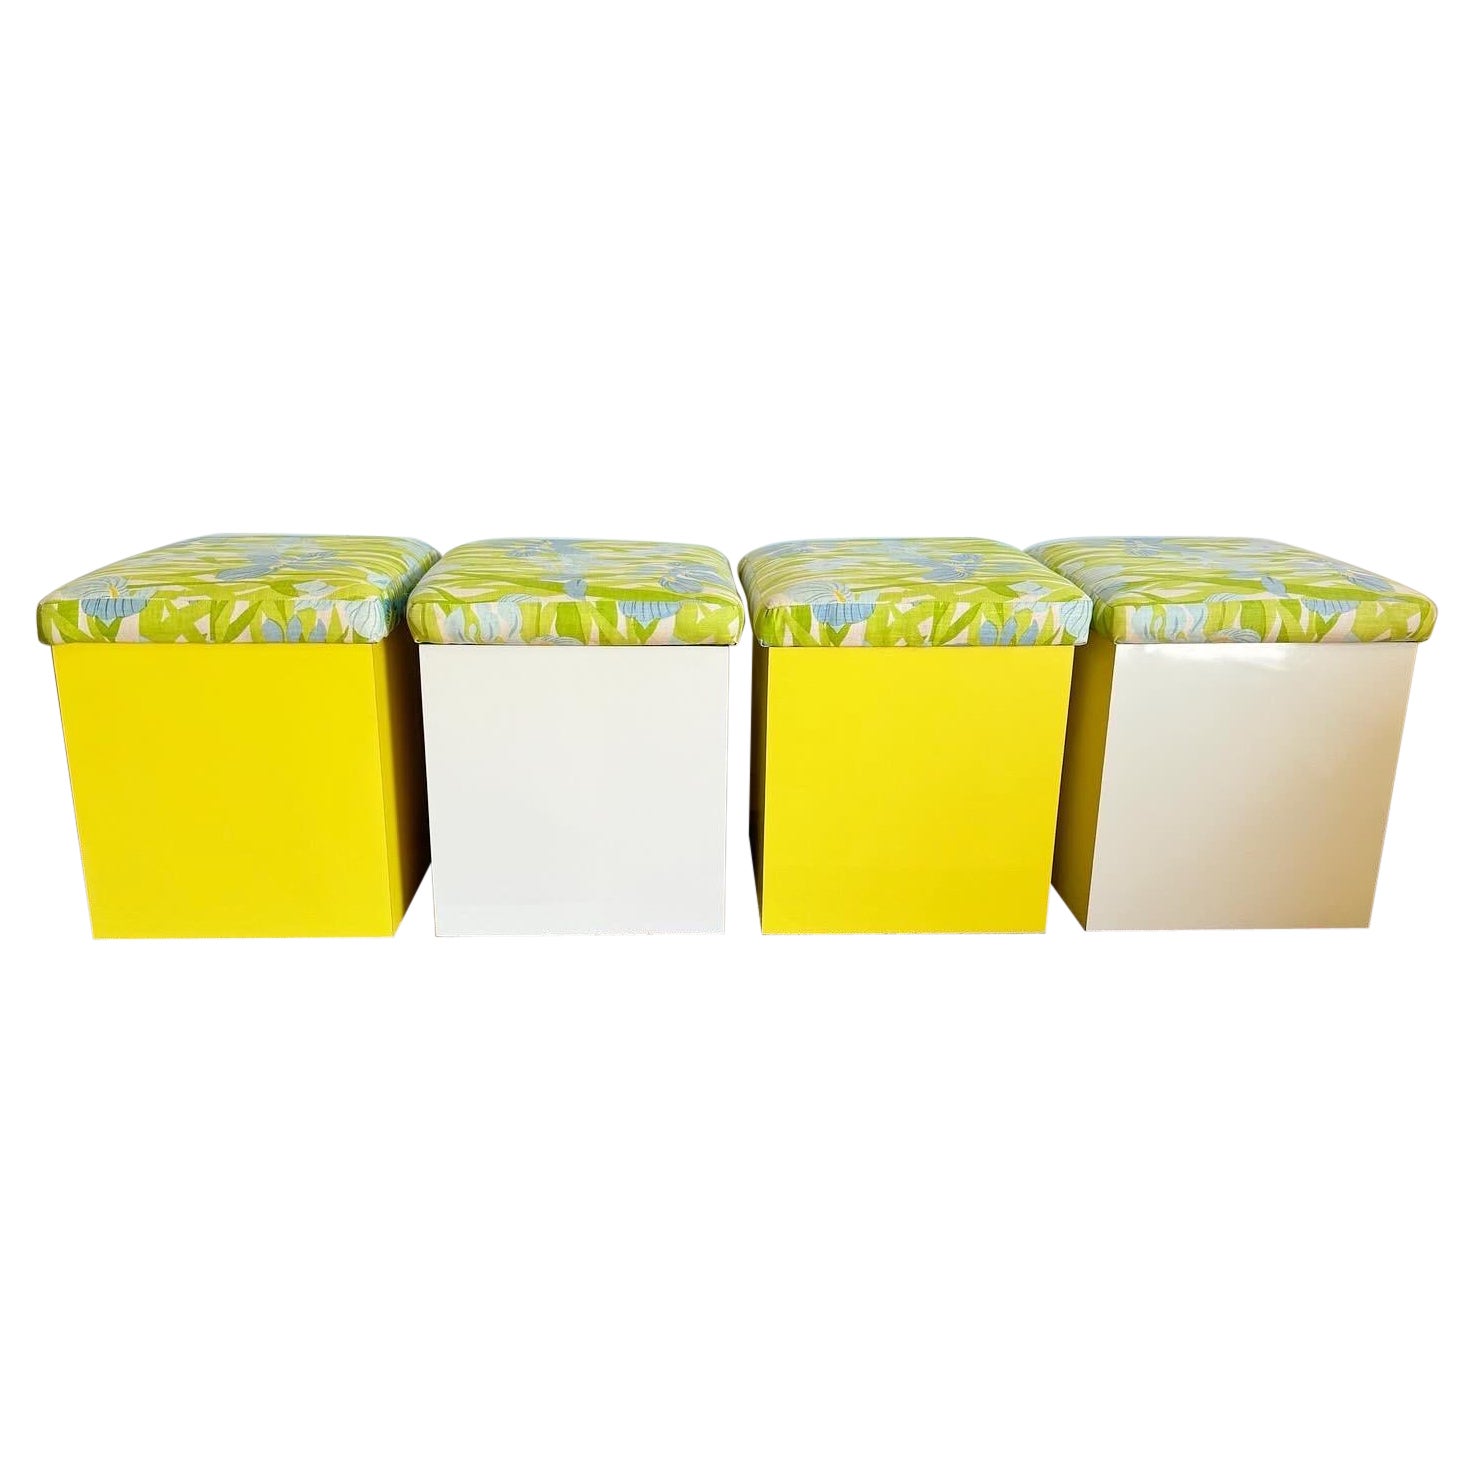 Boho Regency Yellow and Off White Lacquer Laminate Floral Cushion Low Stools For Sale